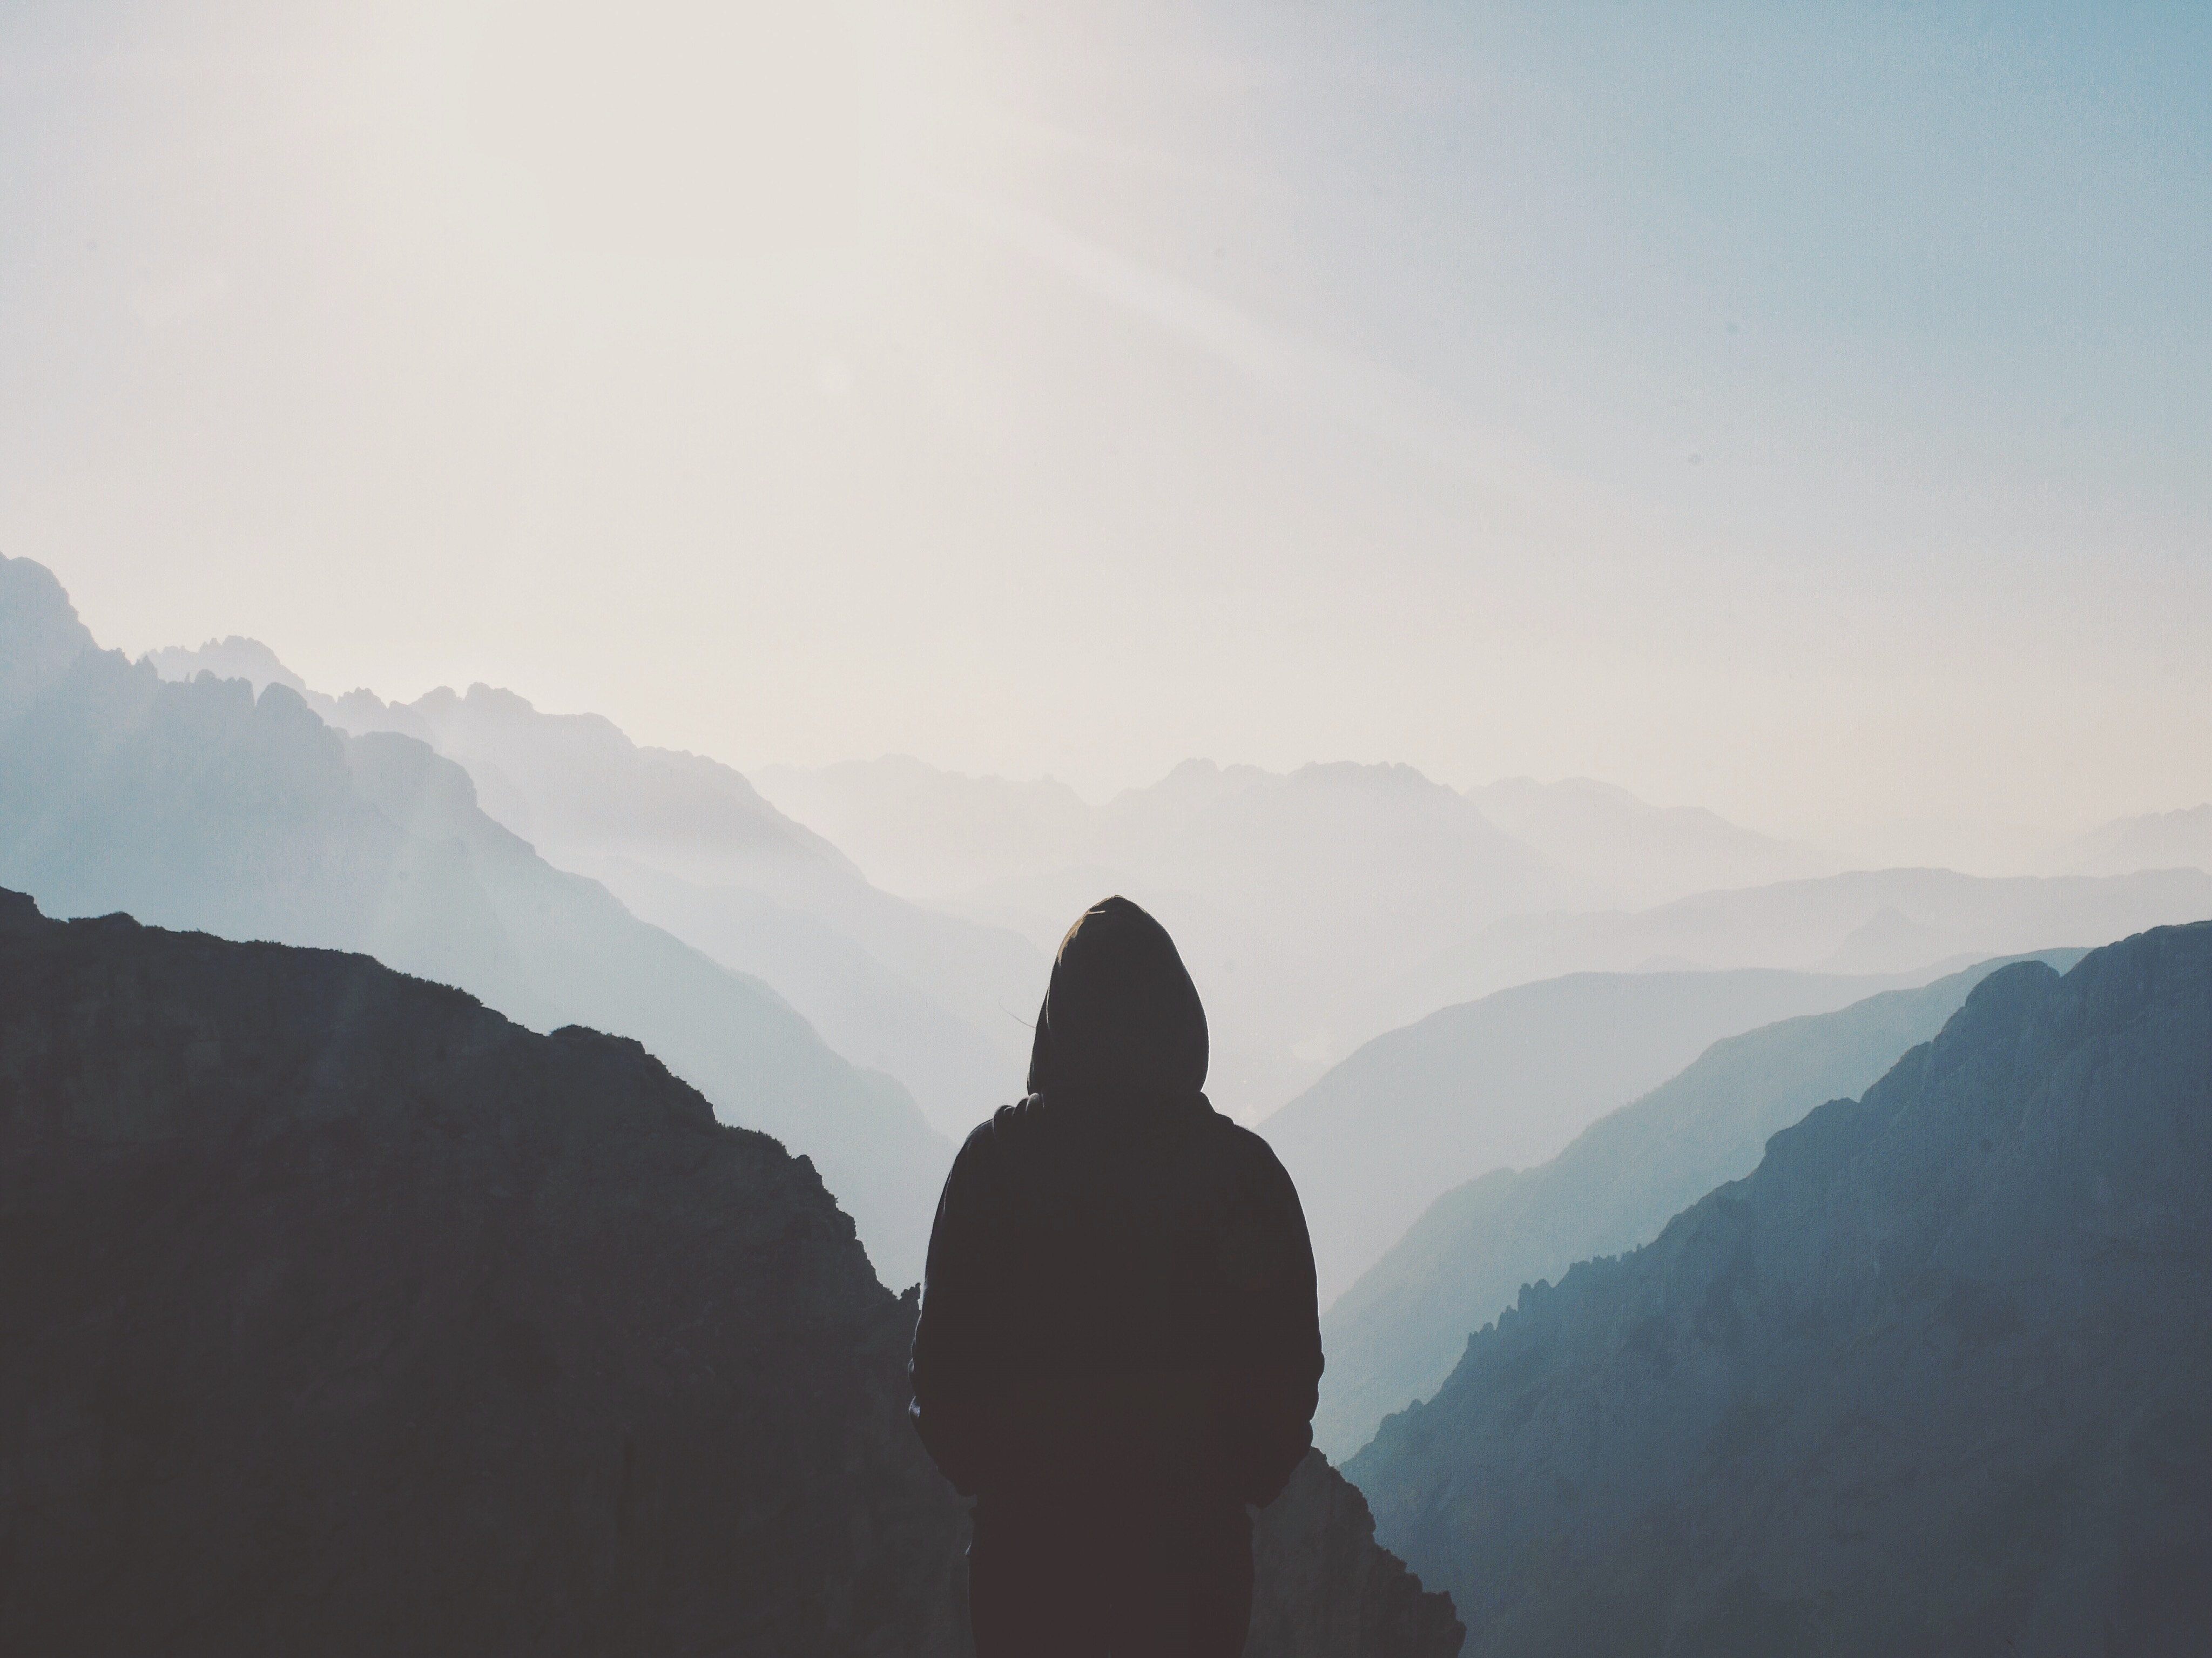 hood, loneliness, silhouette, mountains, miscellanea, miscellaneous, fog Full HD